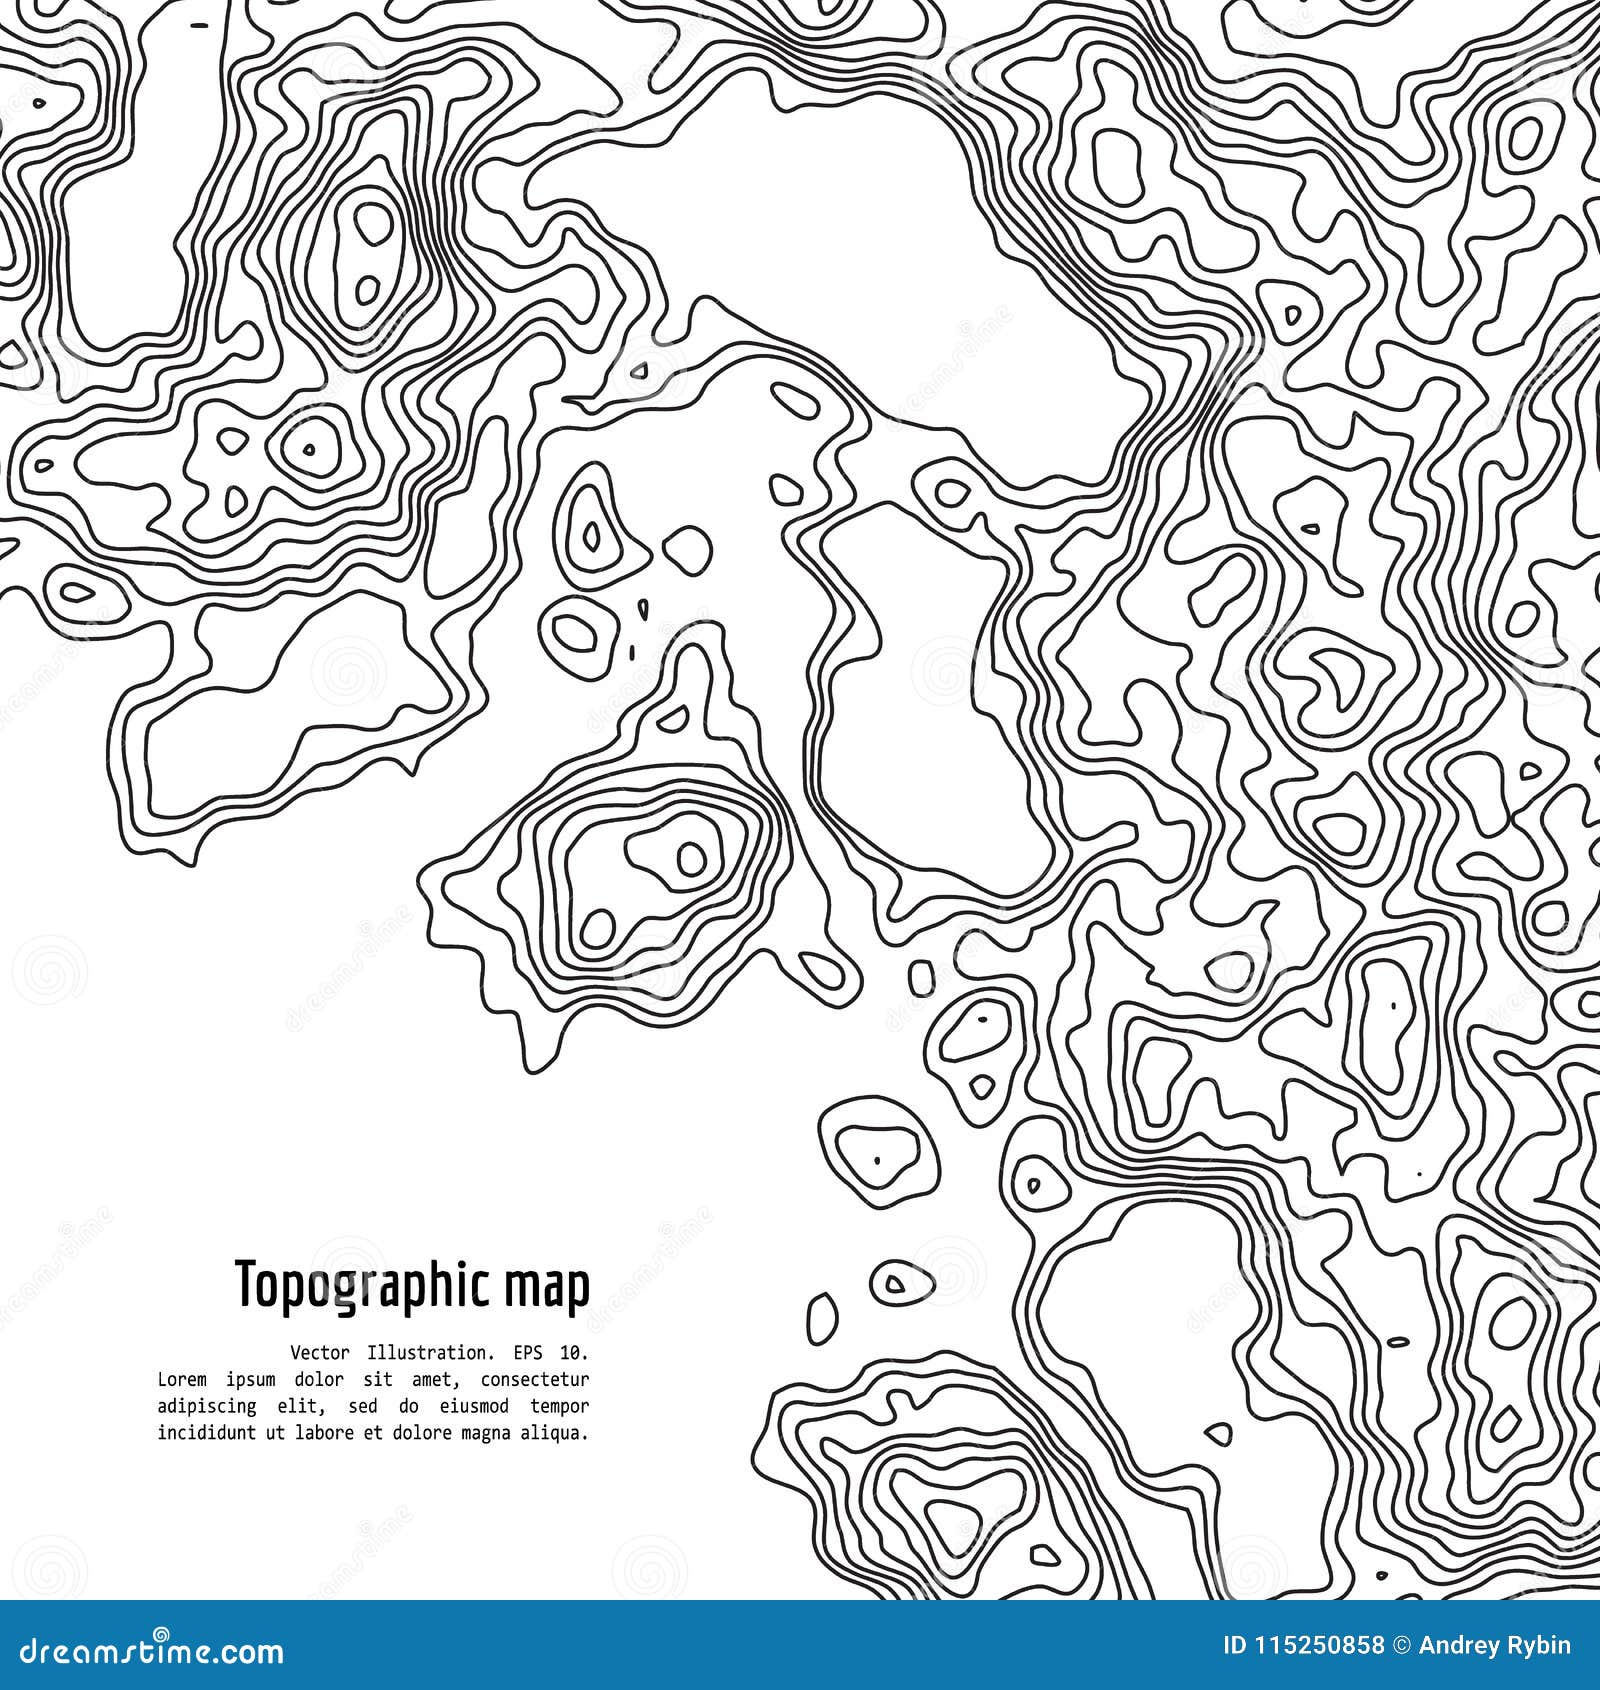  topography map